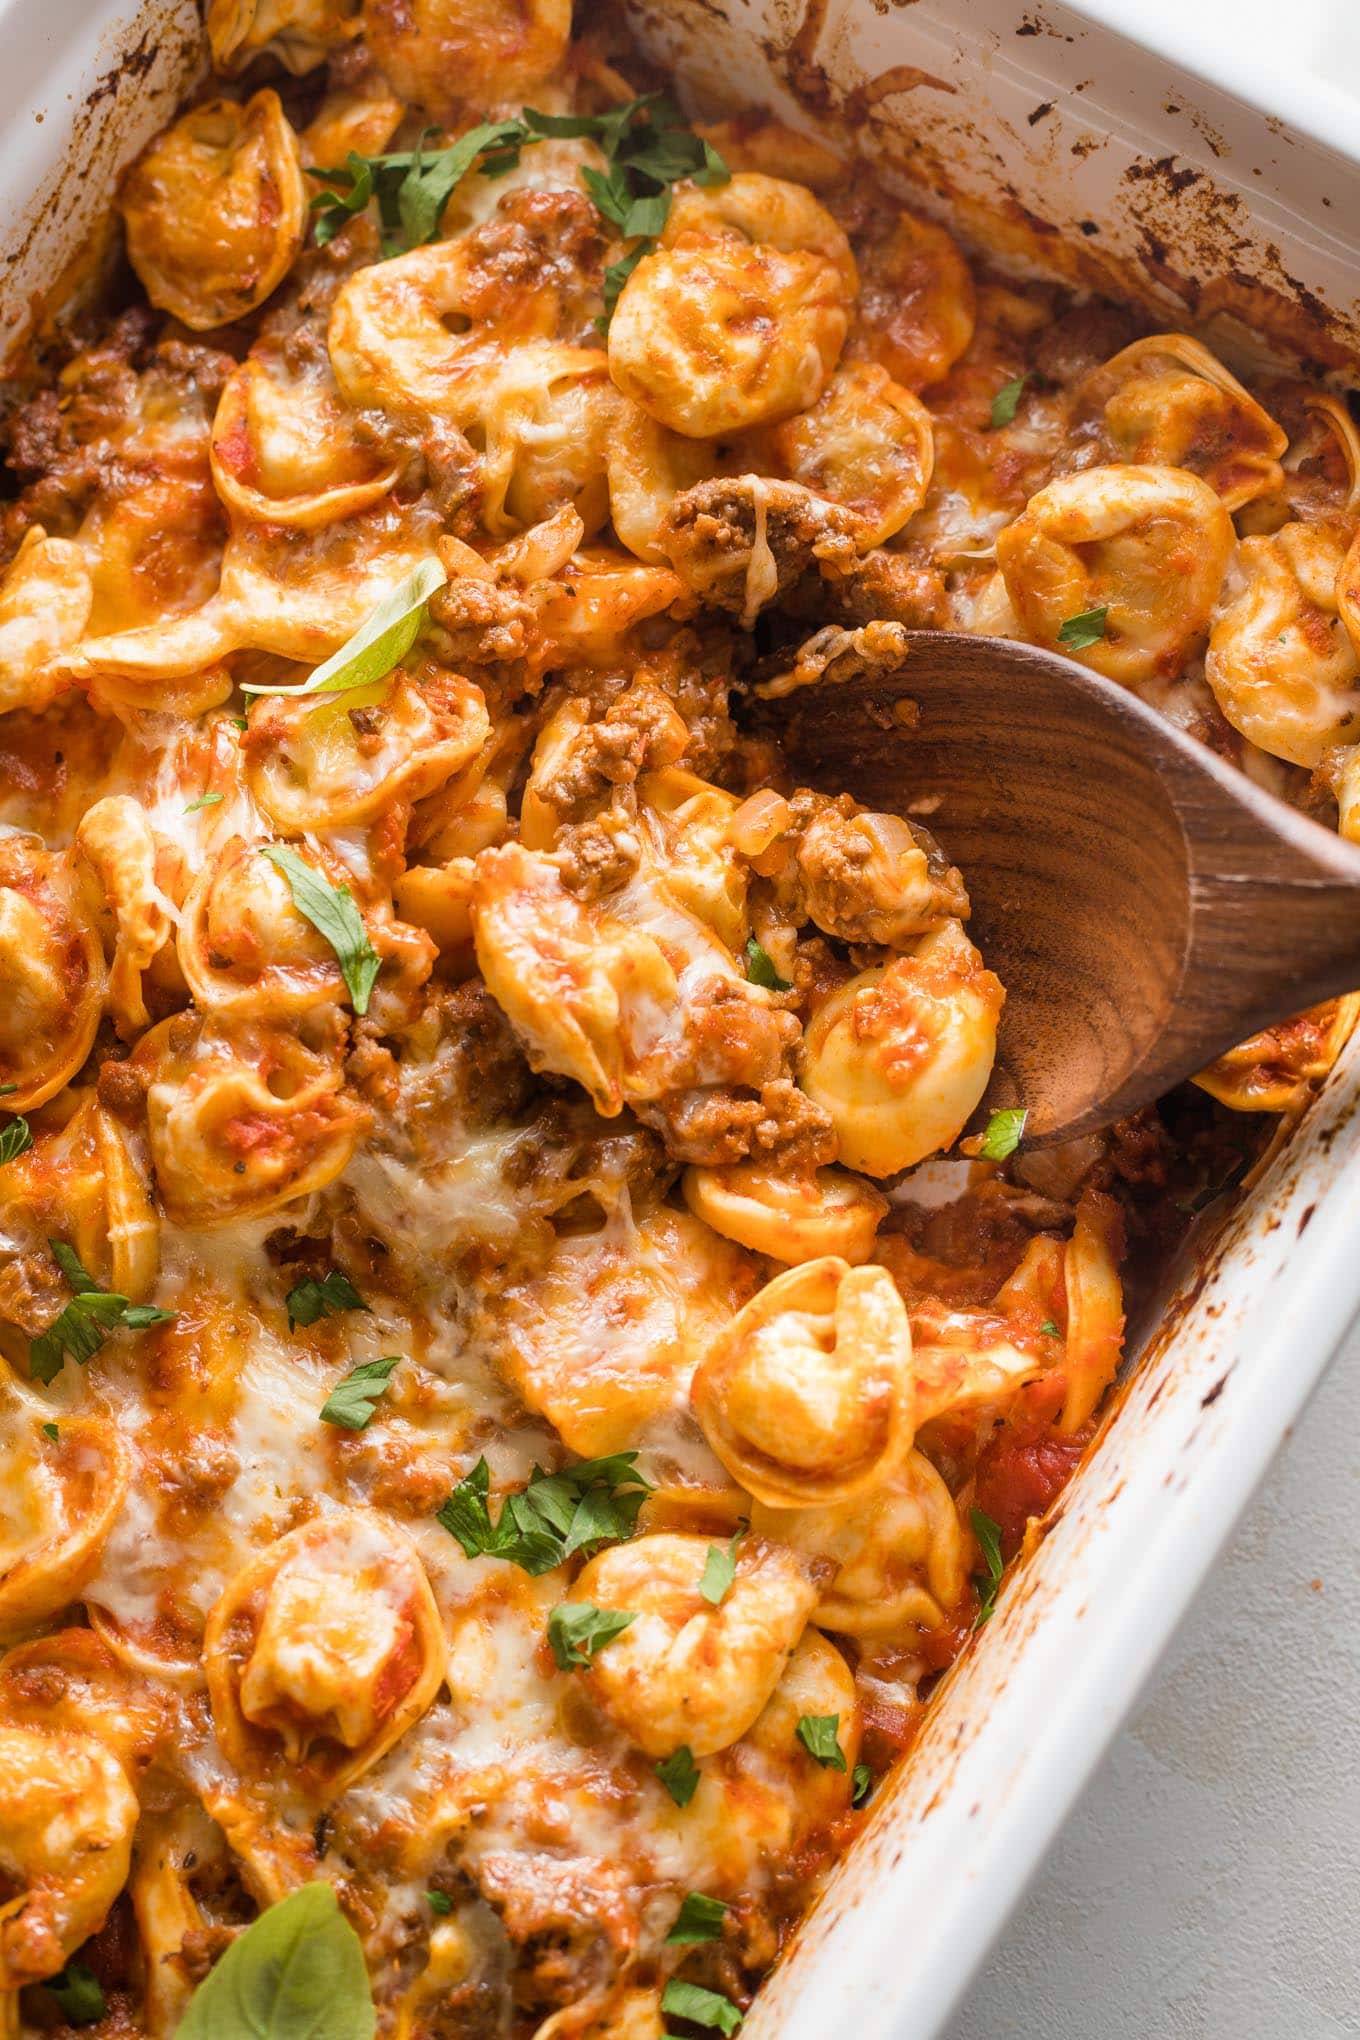 30 Minute Creamy Tortellini Pasta With Ground Turkey - Life is but a Dish